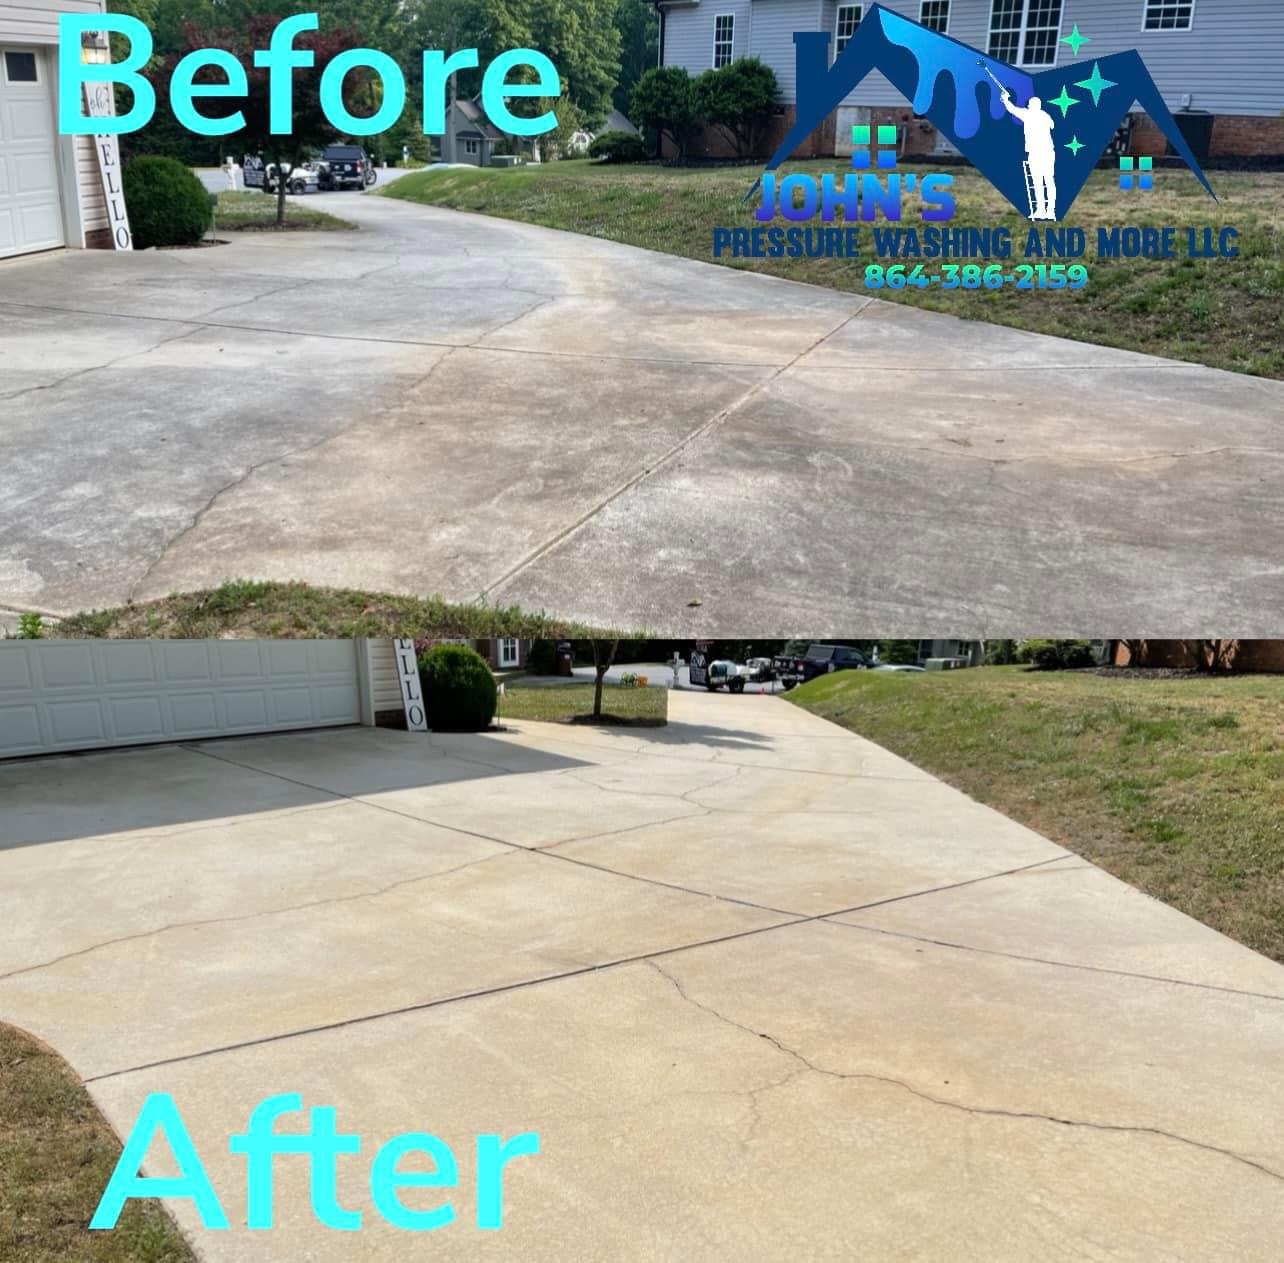 House Wash, Roof Wash, Gutter Cleaning, Gutter Brightening, & Driveway Cleaning in Easley, SC Thumbnail